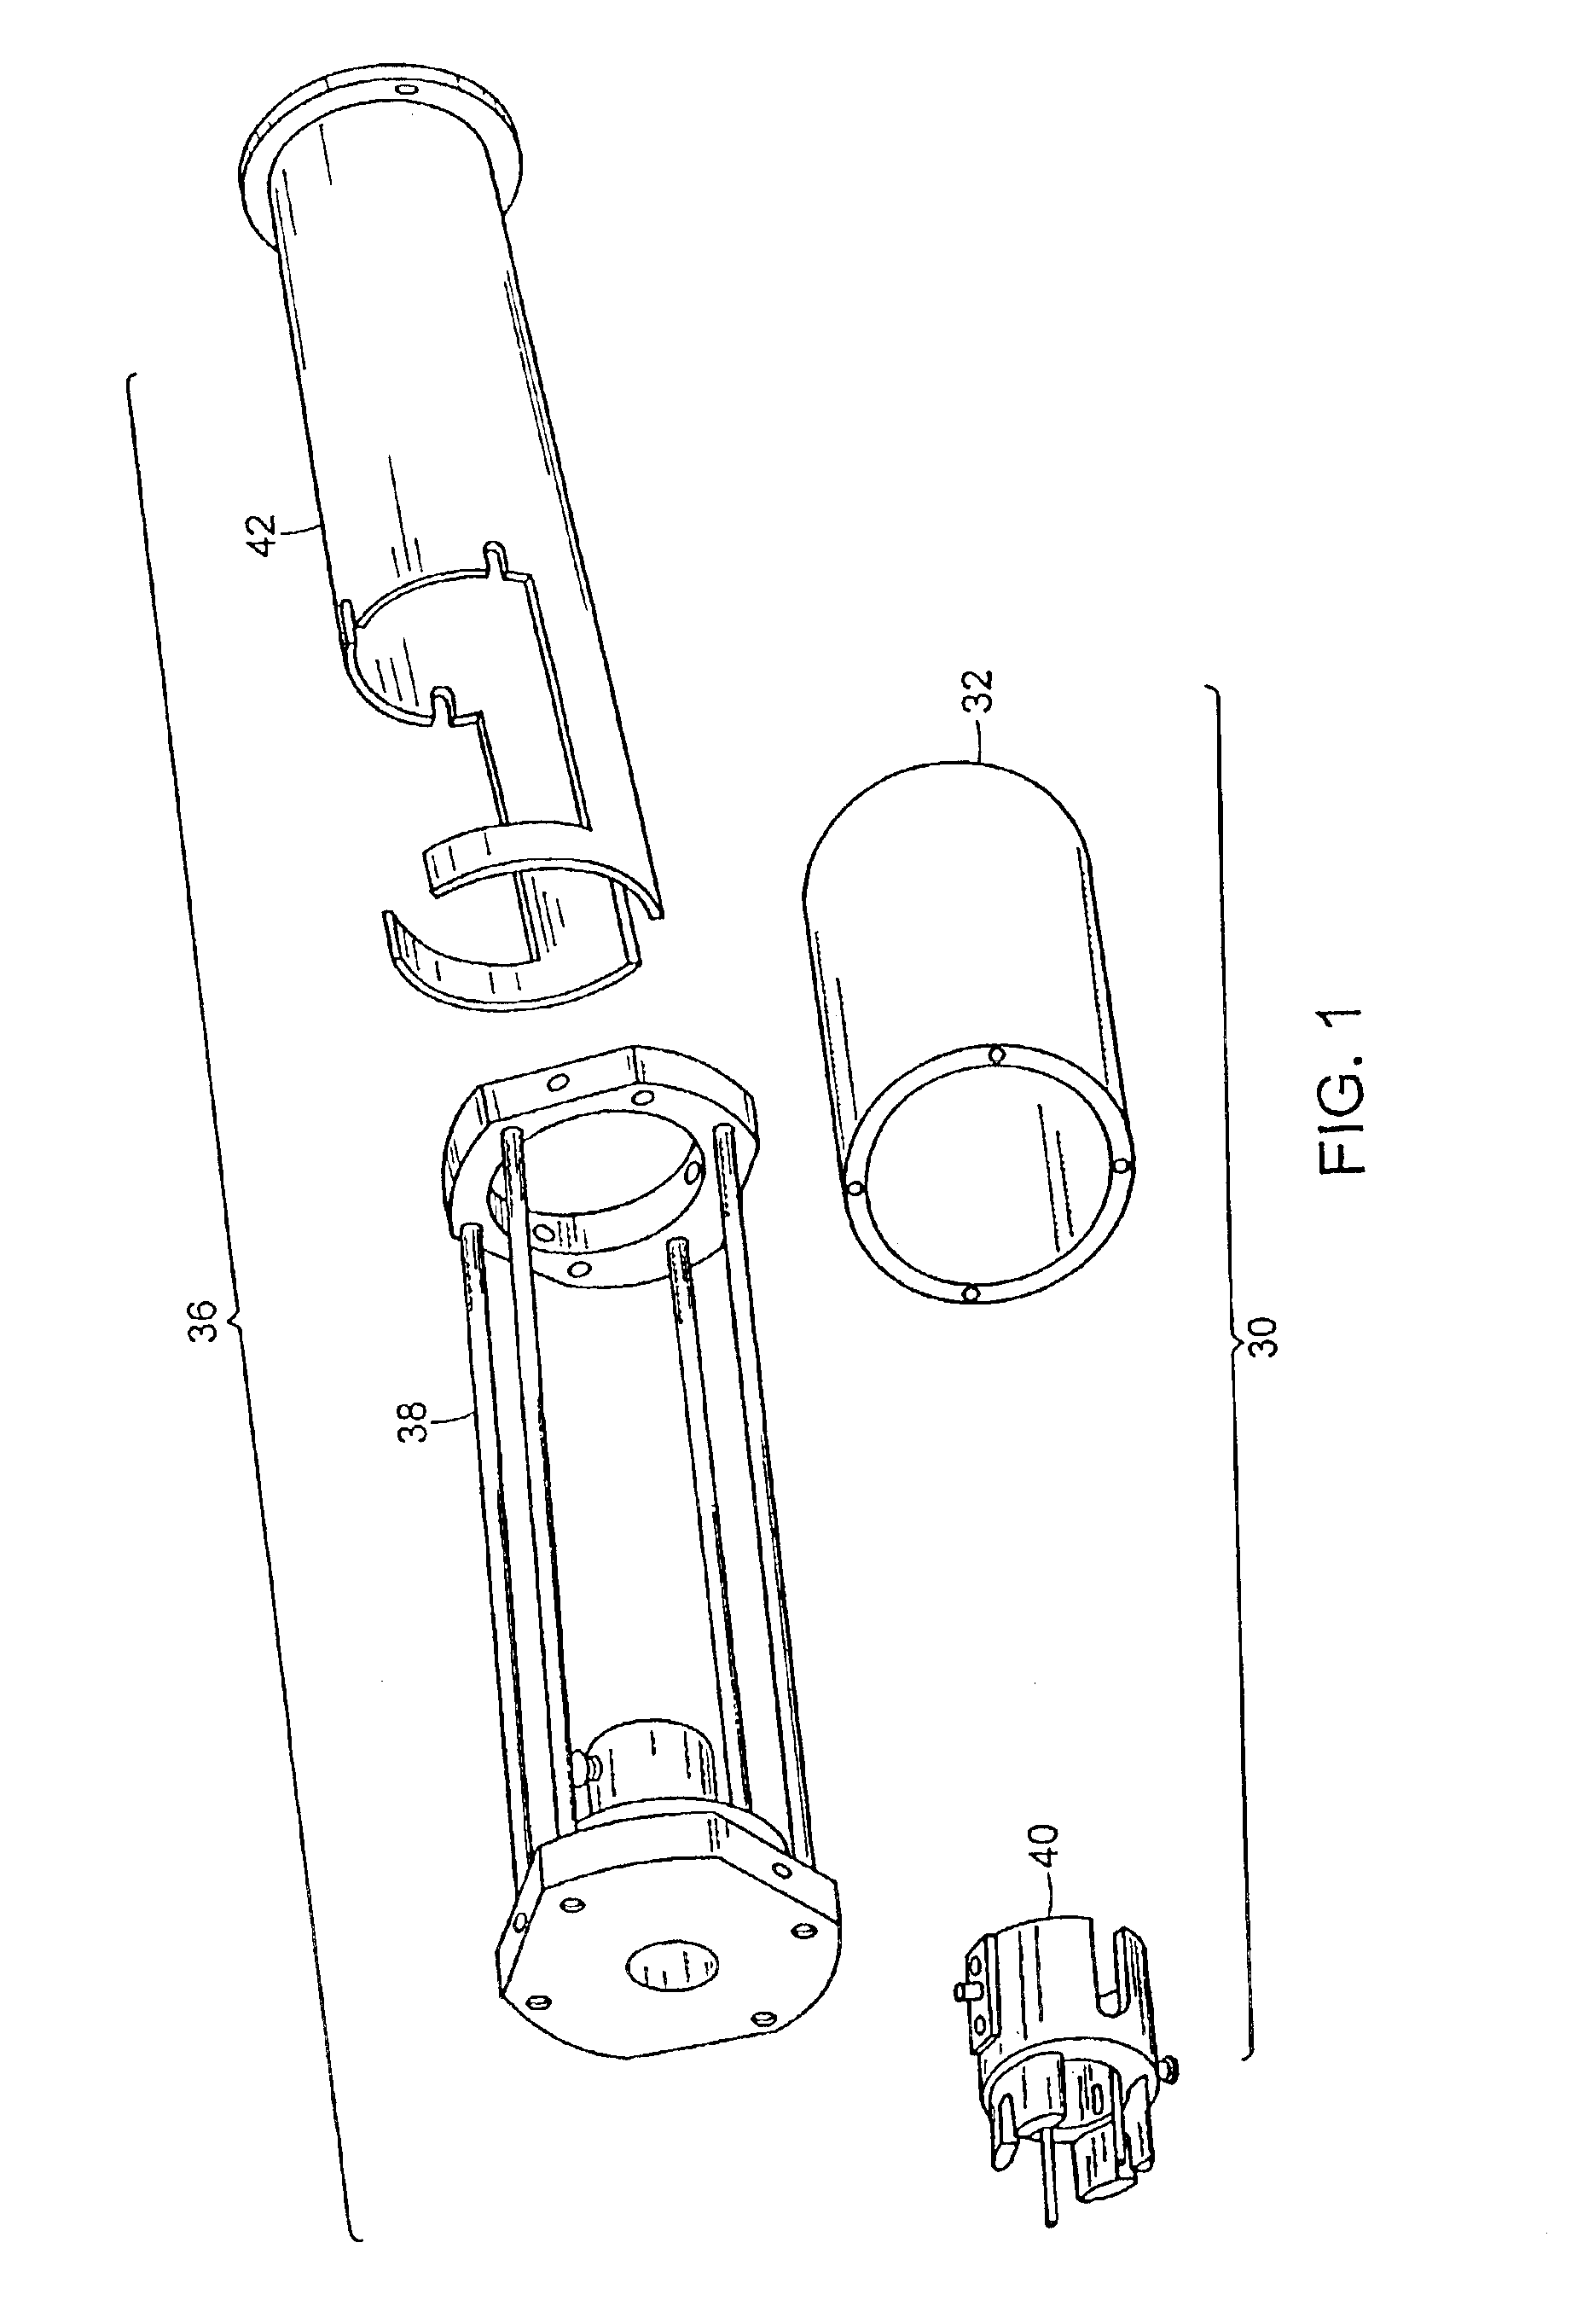 Method and apparatus for performing neuroimaging